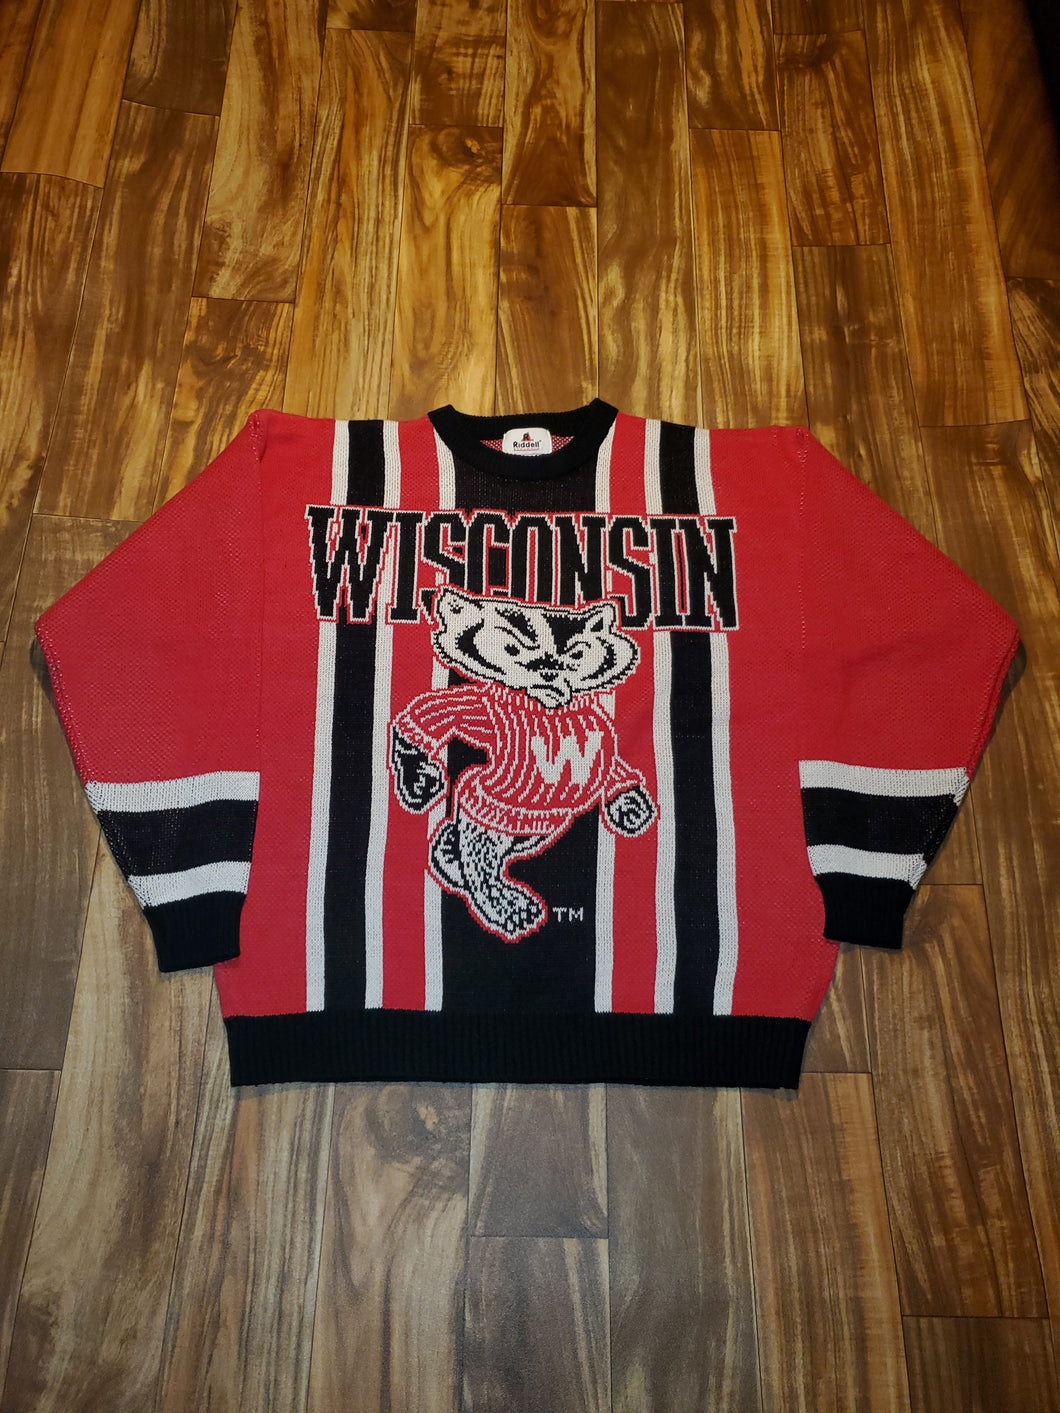 L - NEW Vintage Wisconsin Badgers Sweater